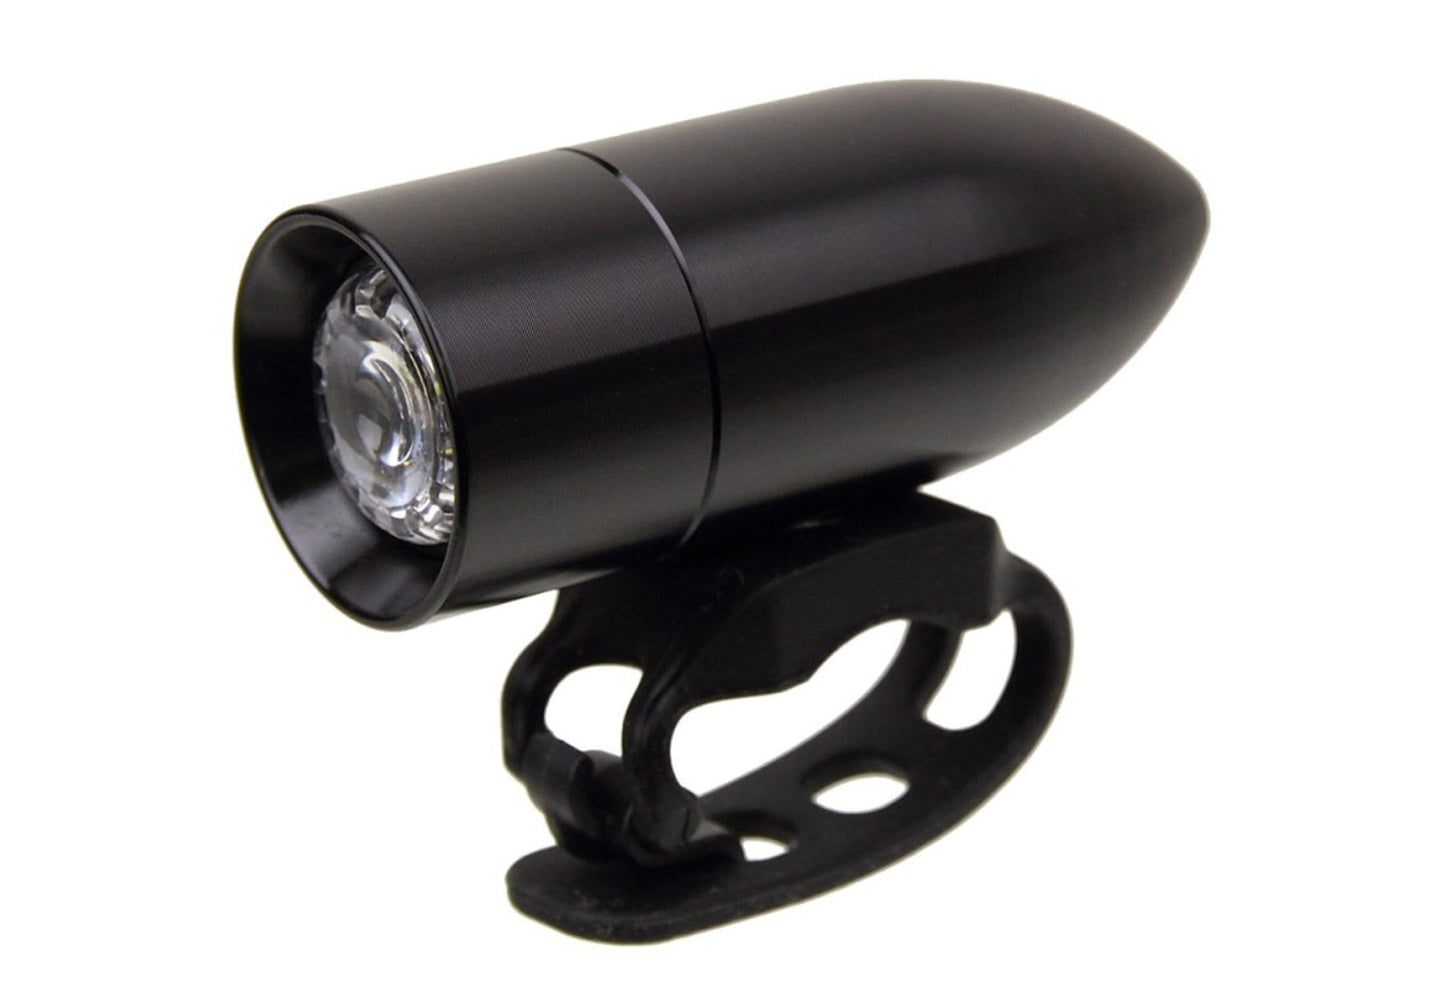 Rindow Bullet Lighting Head Light with rubber band mount